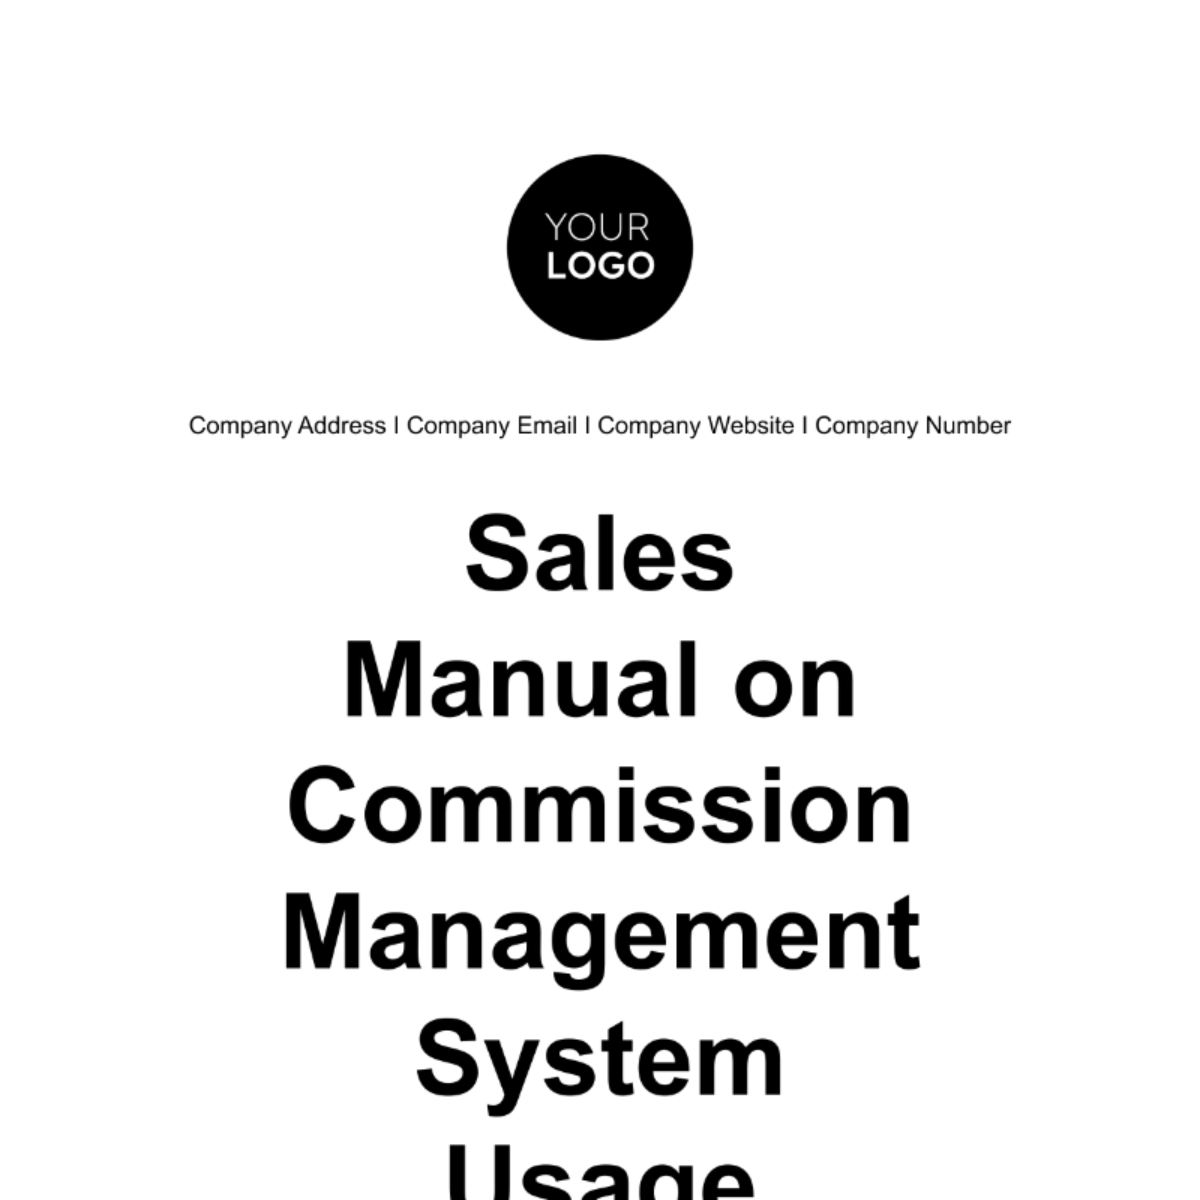 Sales Manual on Commission Management System Usage Template